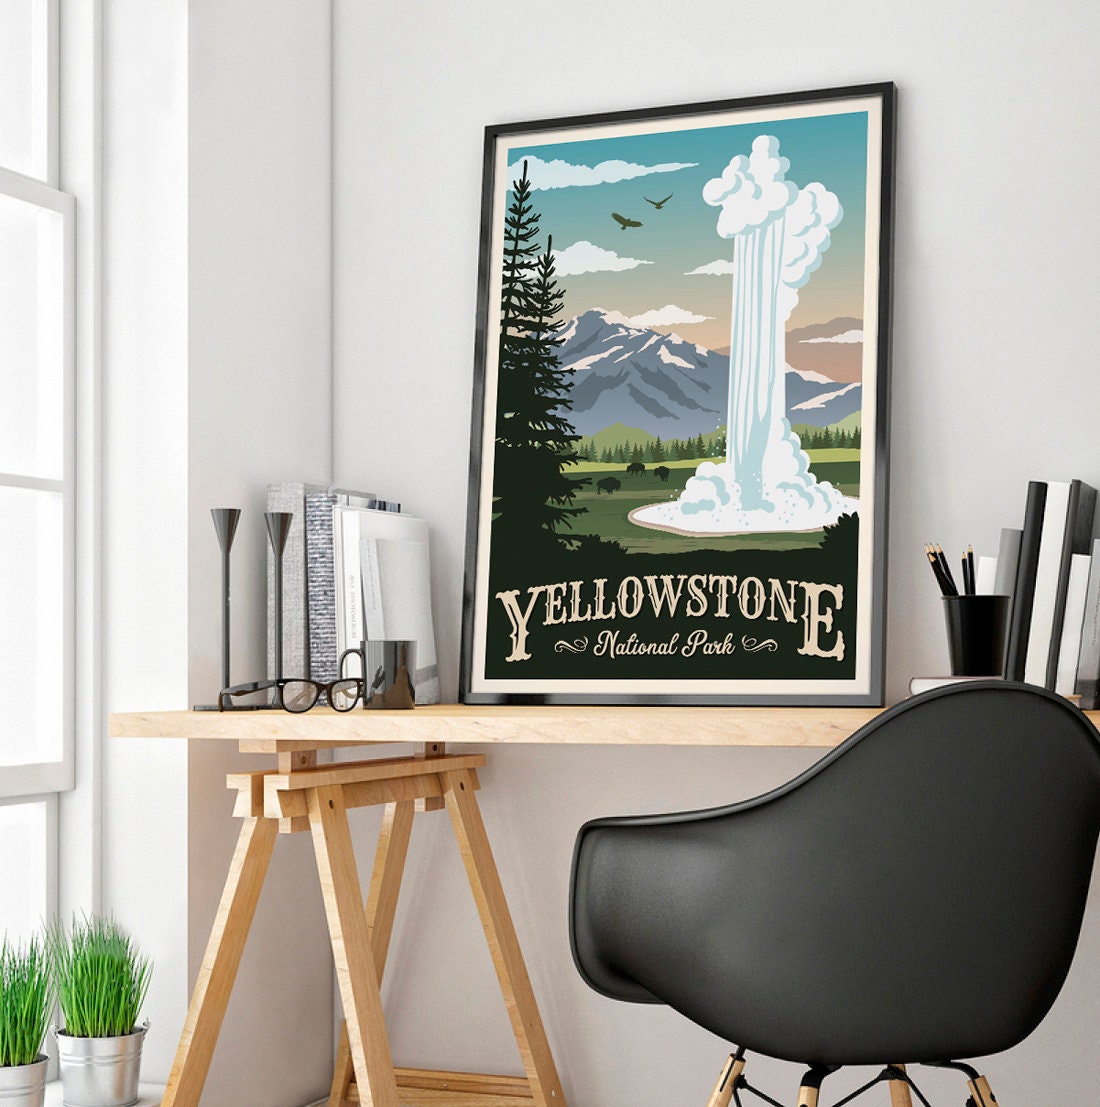 96109 Yellowstone National Park Wyoming United States Decor Wall Print  Poster